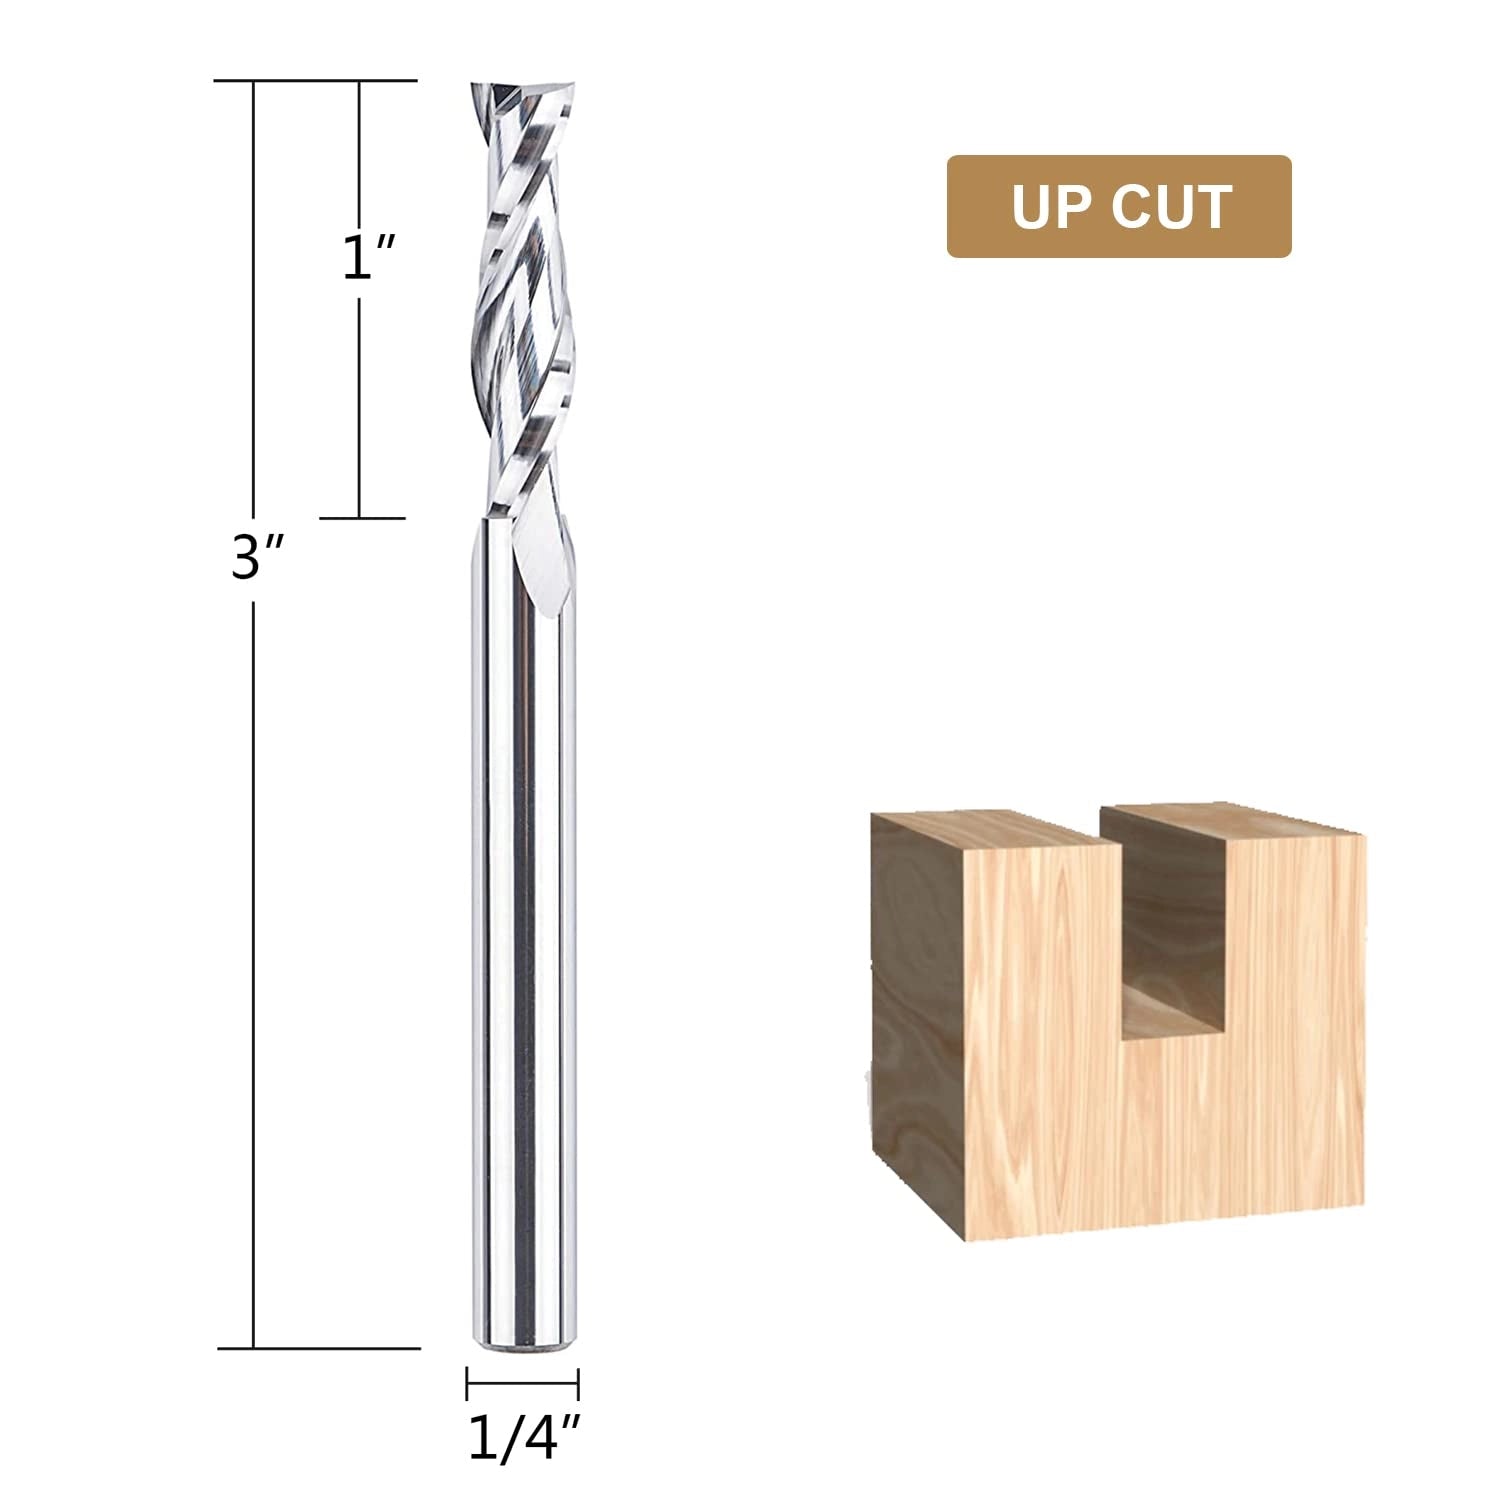 SpeTool SC Upcut Spiral Router Bit 1/4" Diam 3" Extra long For Wood cut